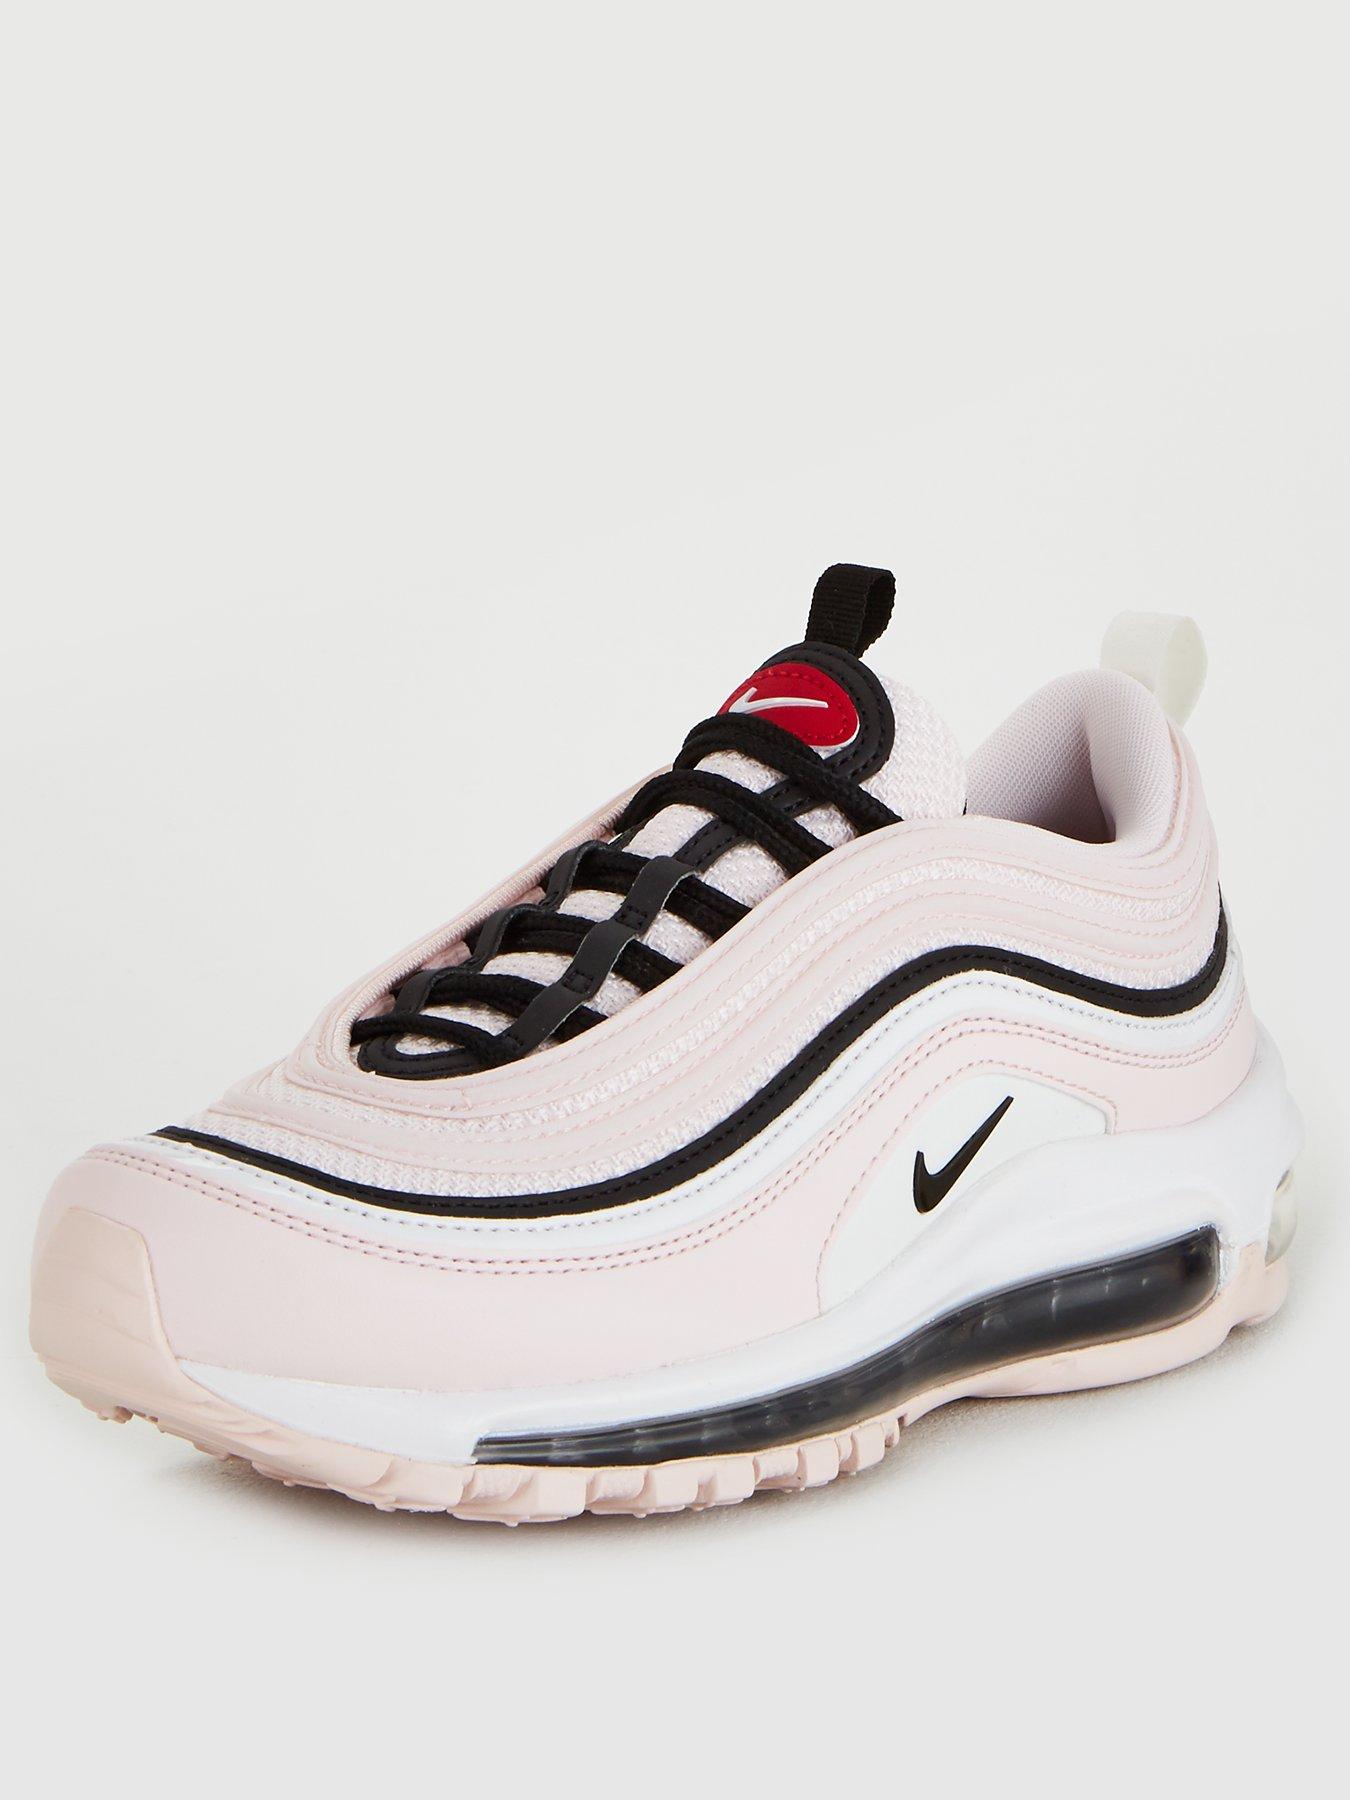 nike white and pink air max 97 trainers